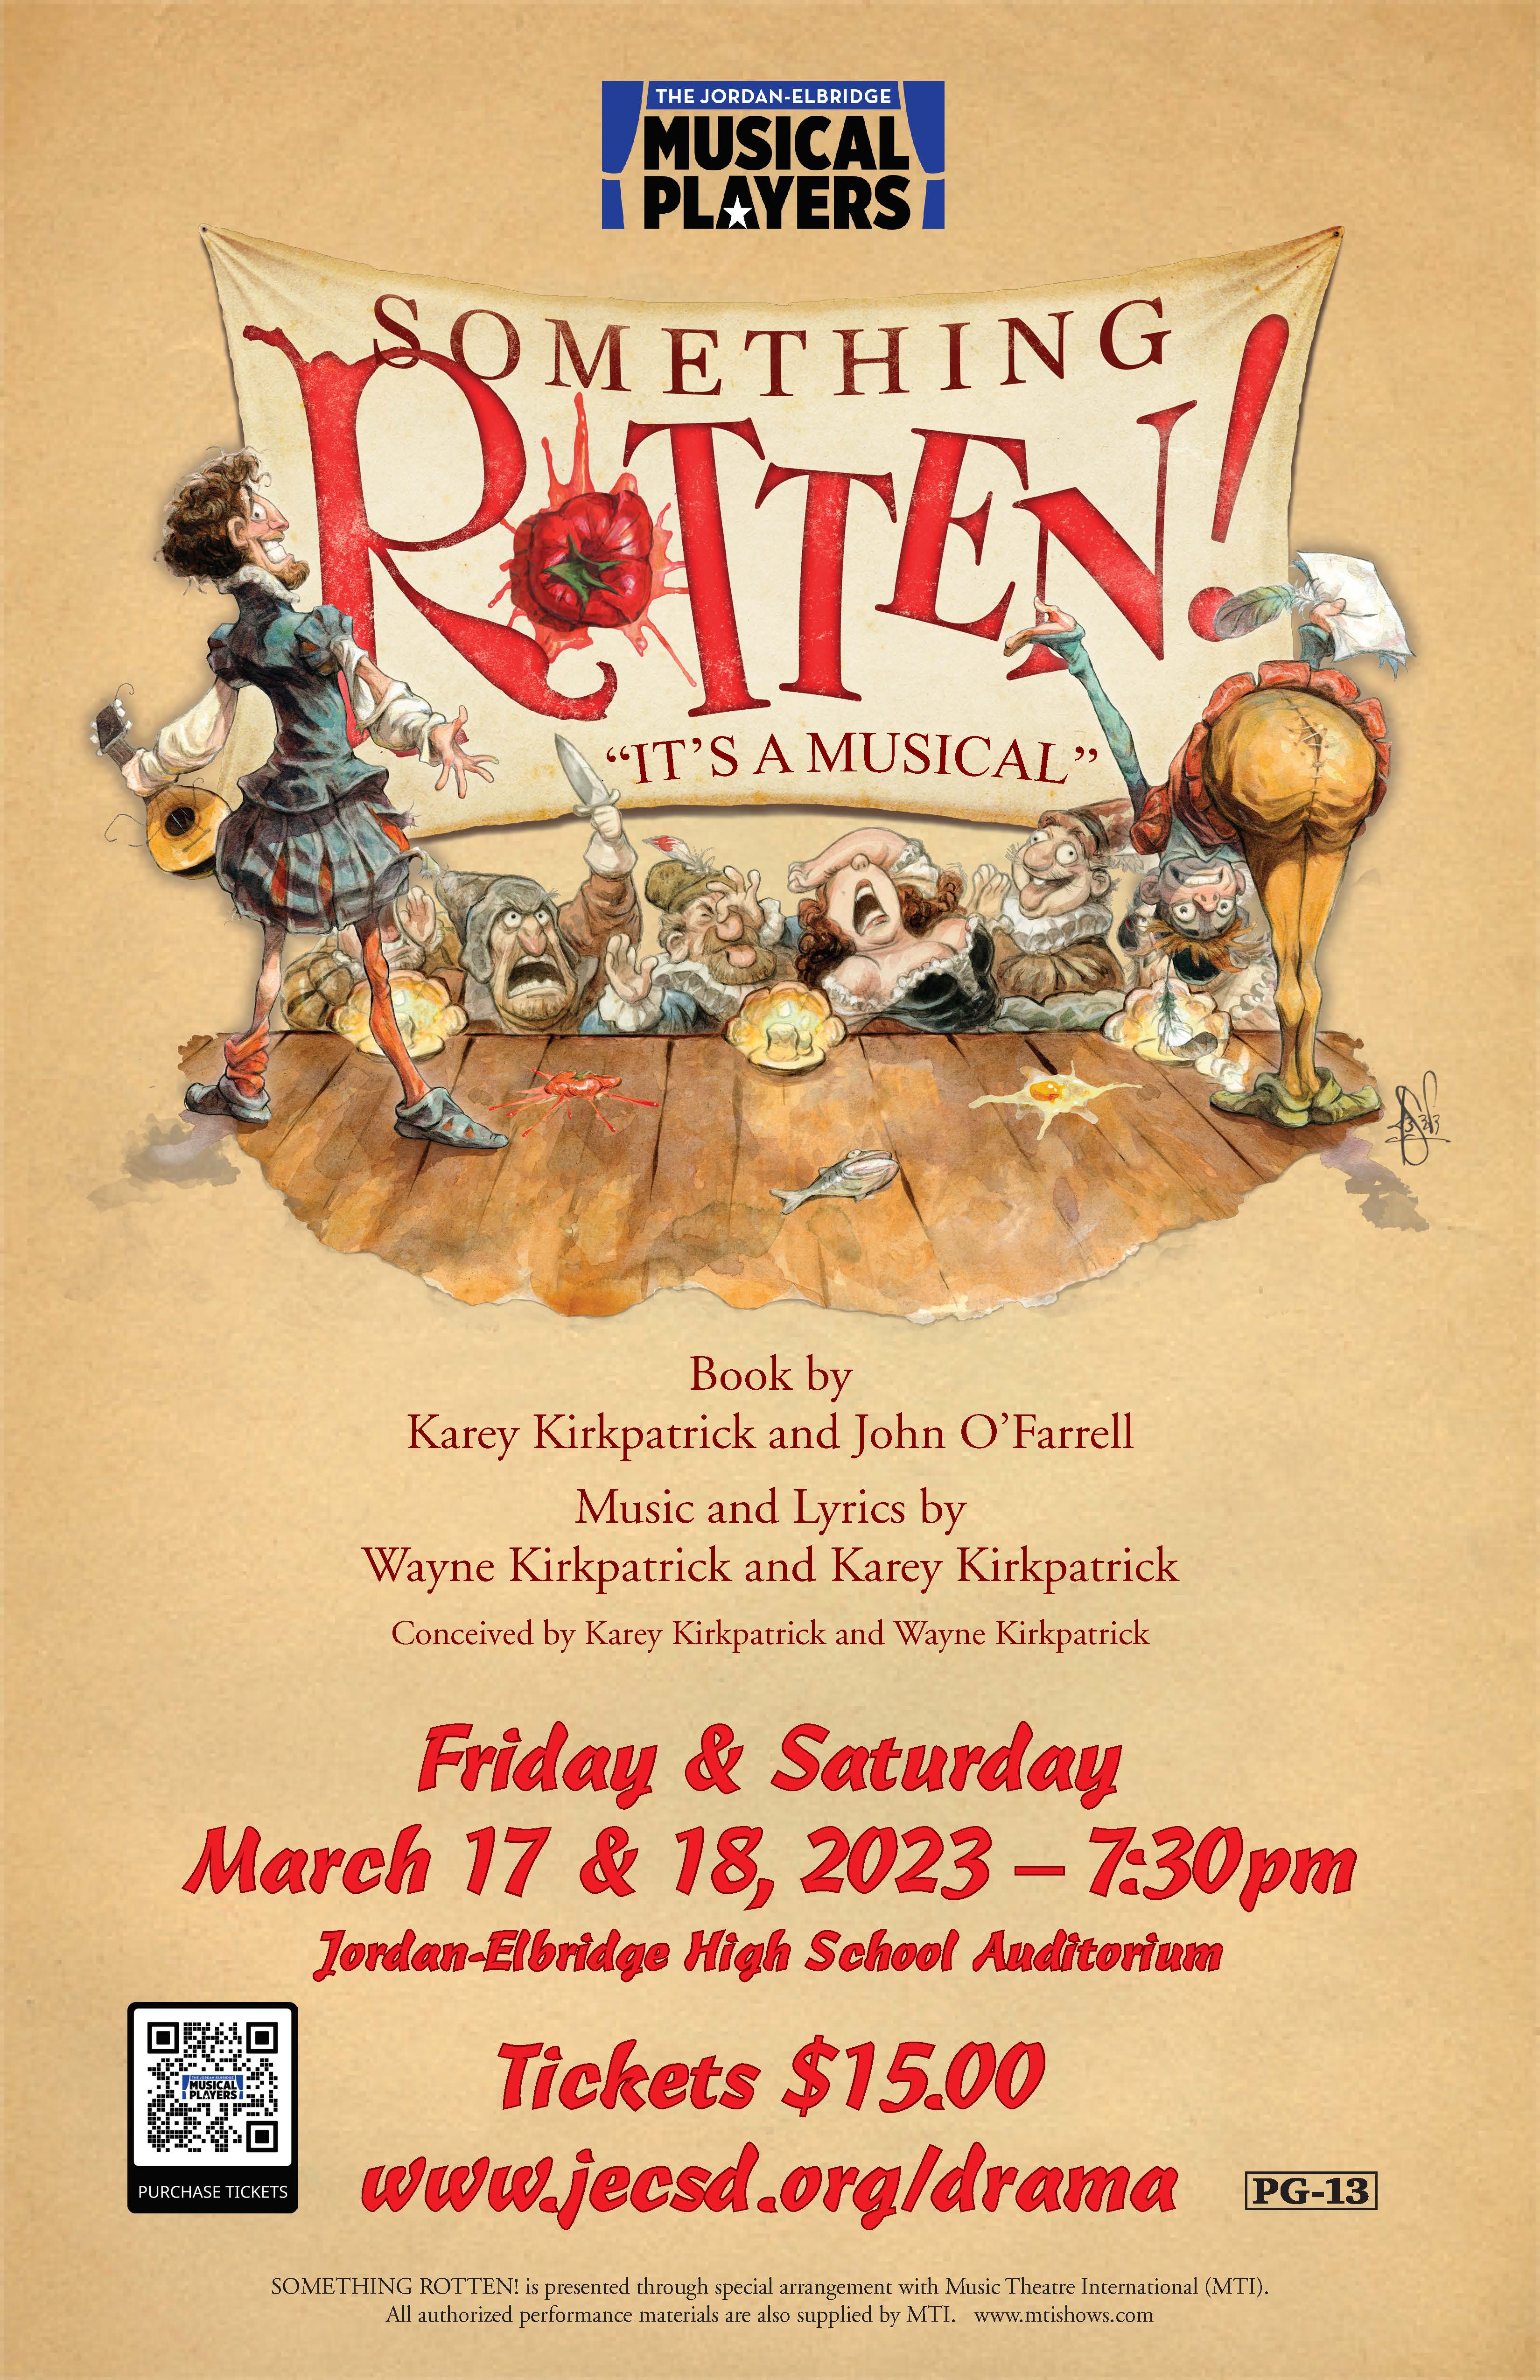 JE Musical Players will present "Something Rotten!" on March 17th and 18th